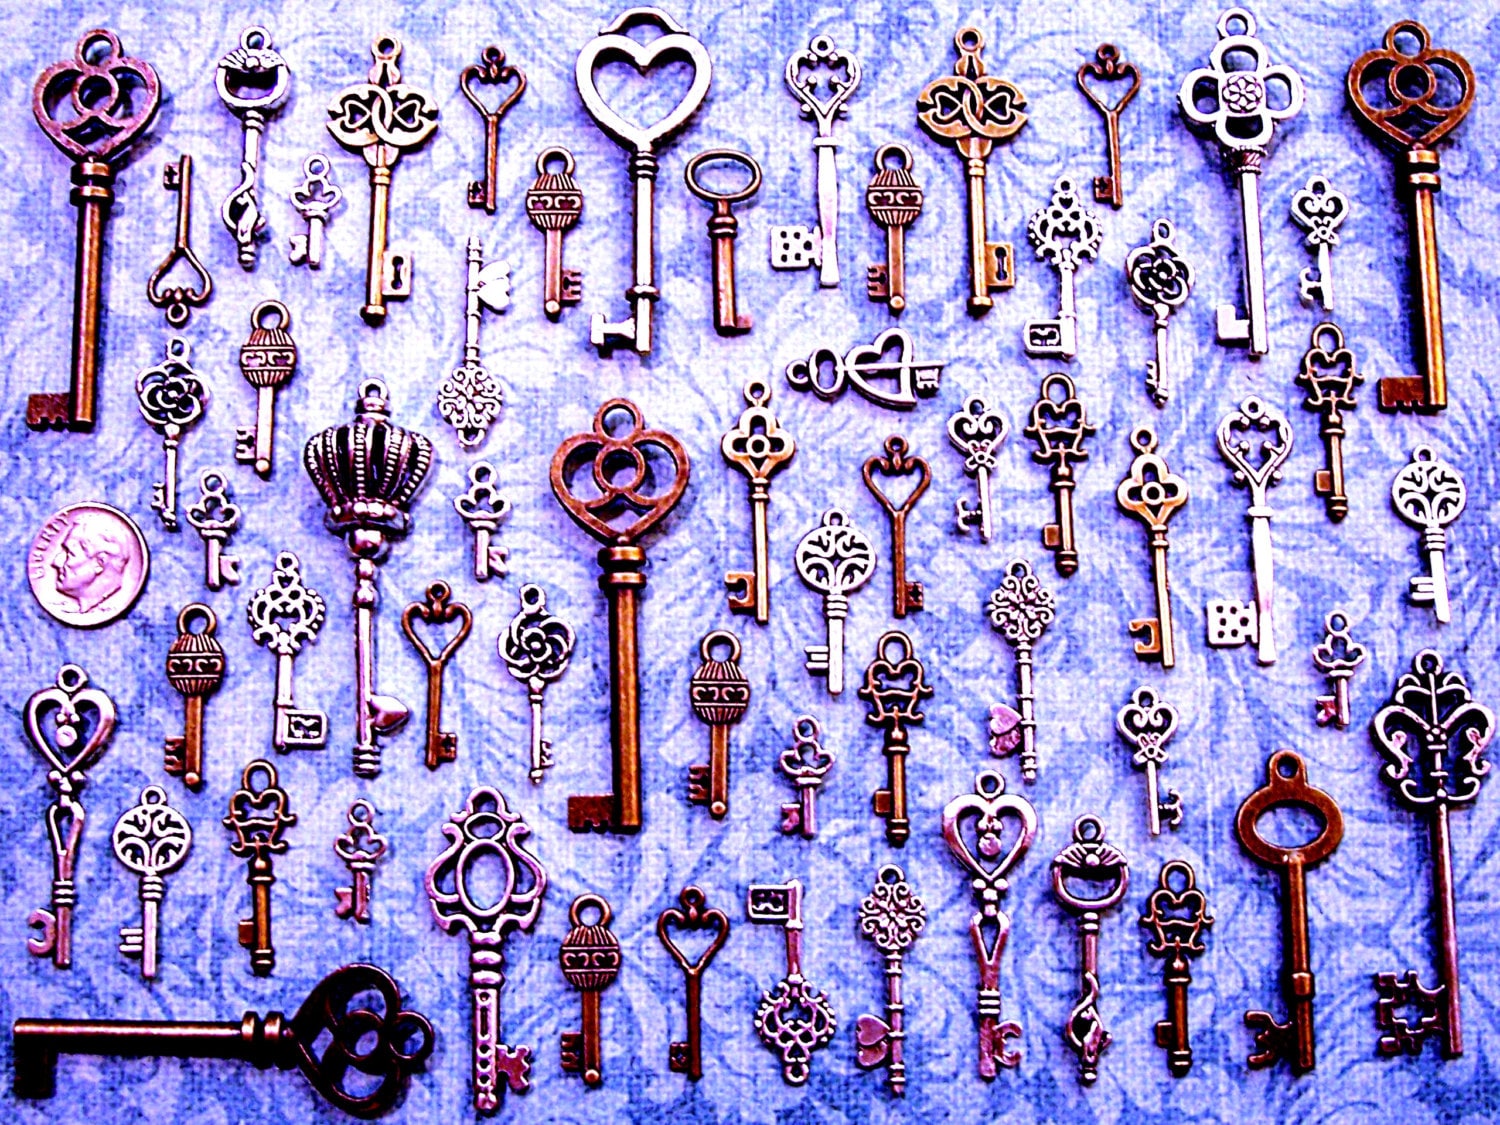 68 Bulk Lot Skeleton Keys Vintage Antique Look Replica Charms Jewelry Steampunk Wedding Bead Supplies Pendant Collection Reproduction Craft steampunk buy now online